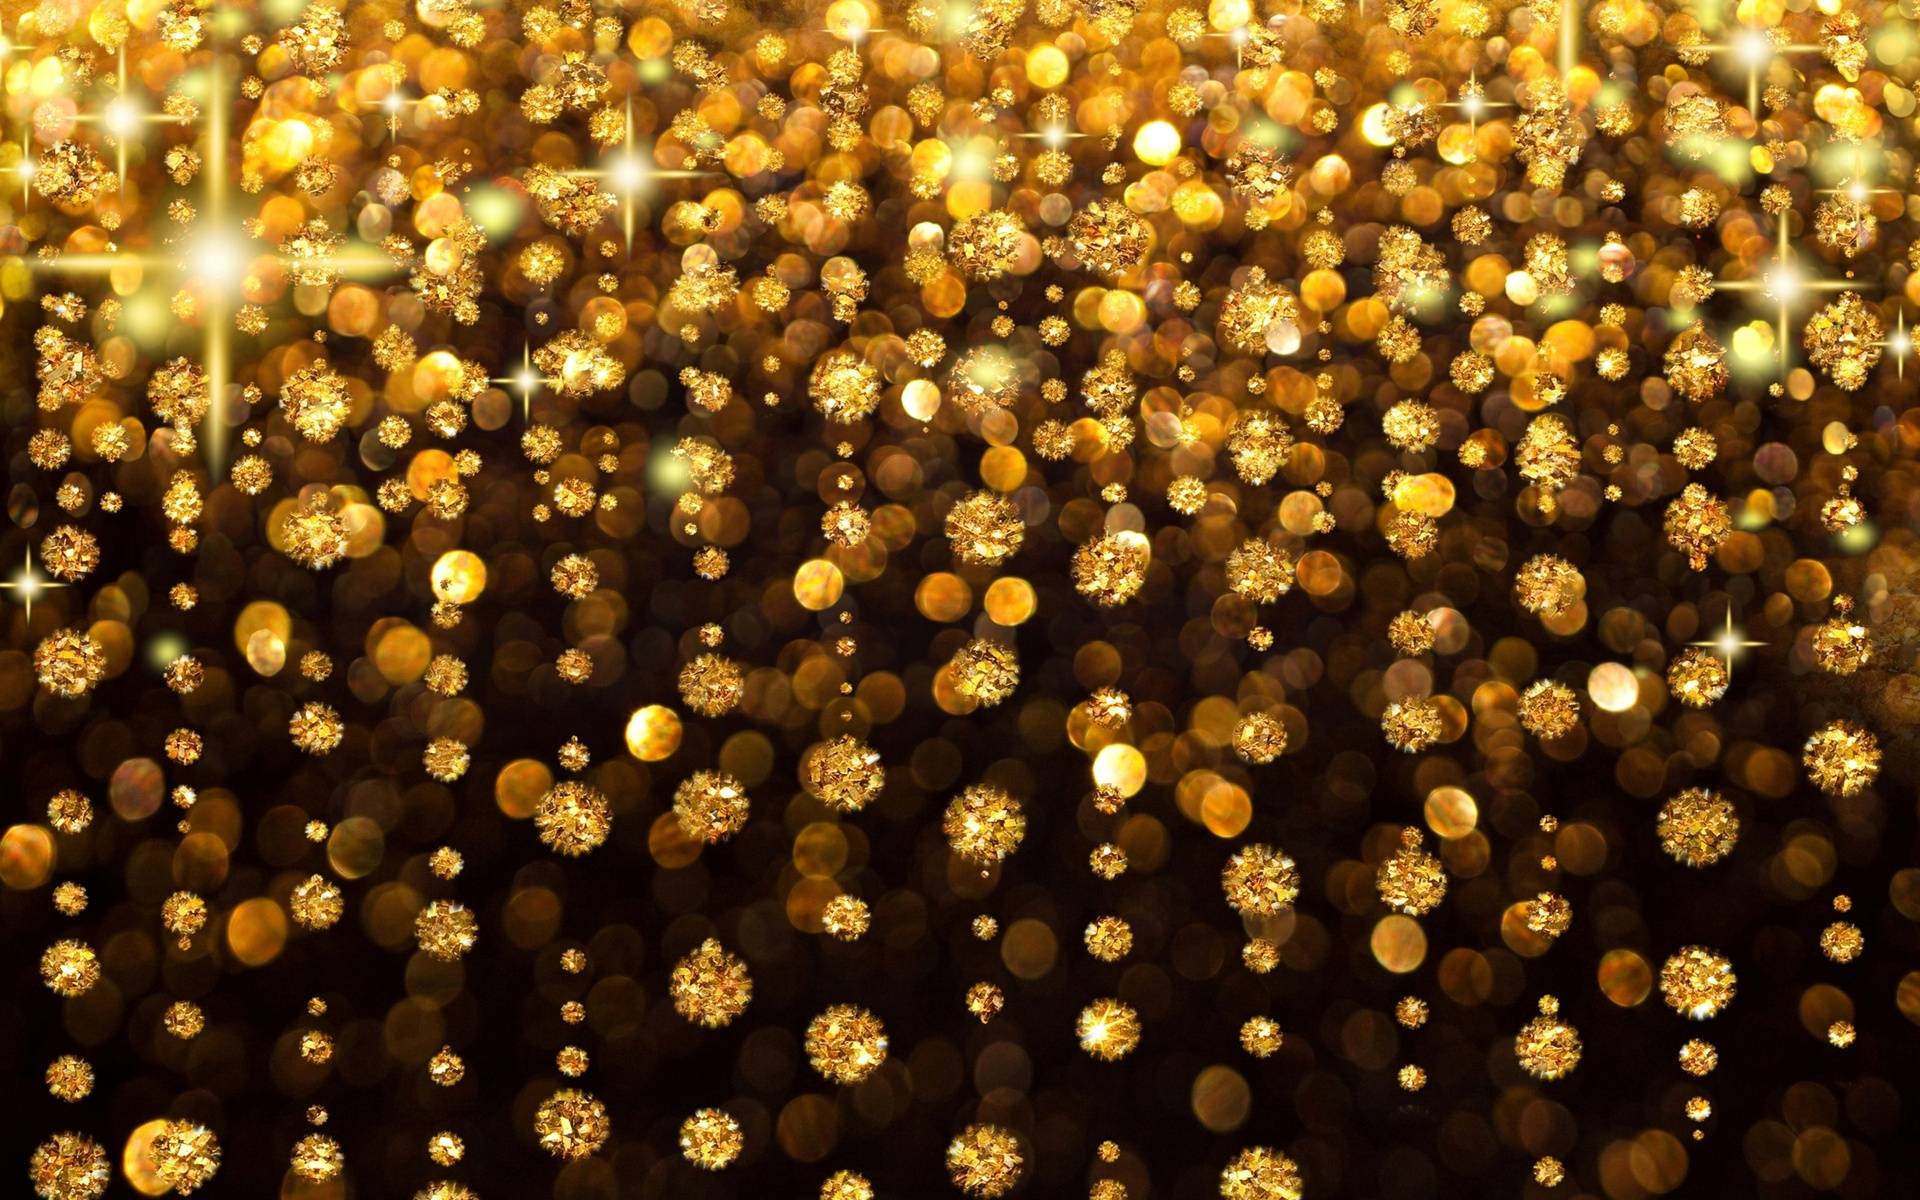 Wallpaper For > Black And Gold Christmas Wallpaper